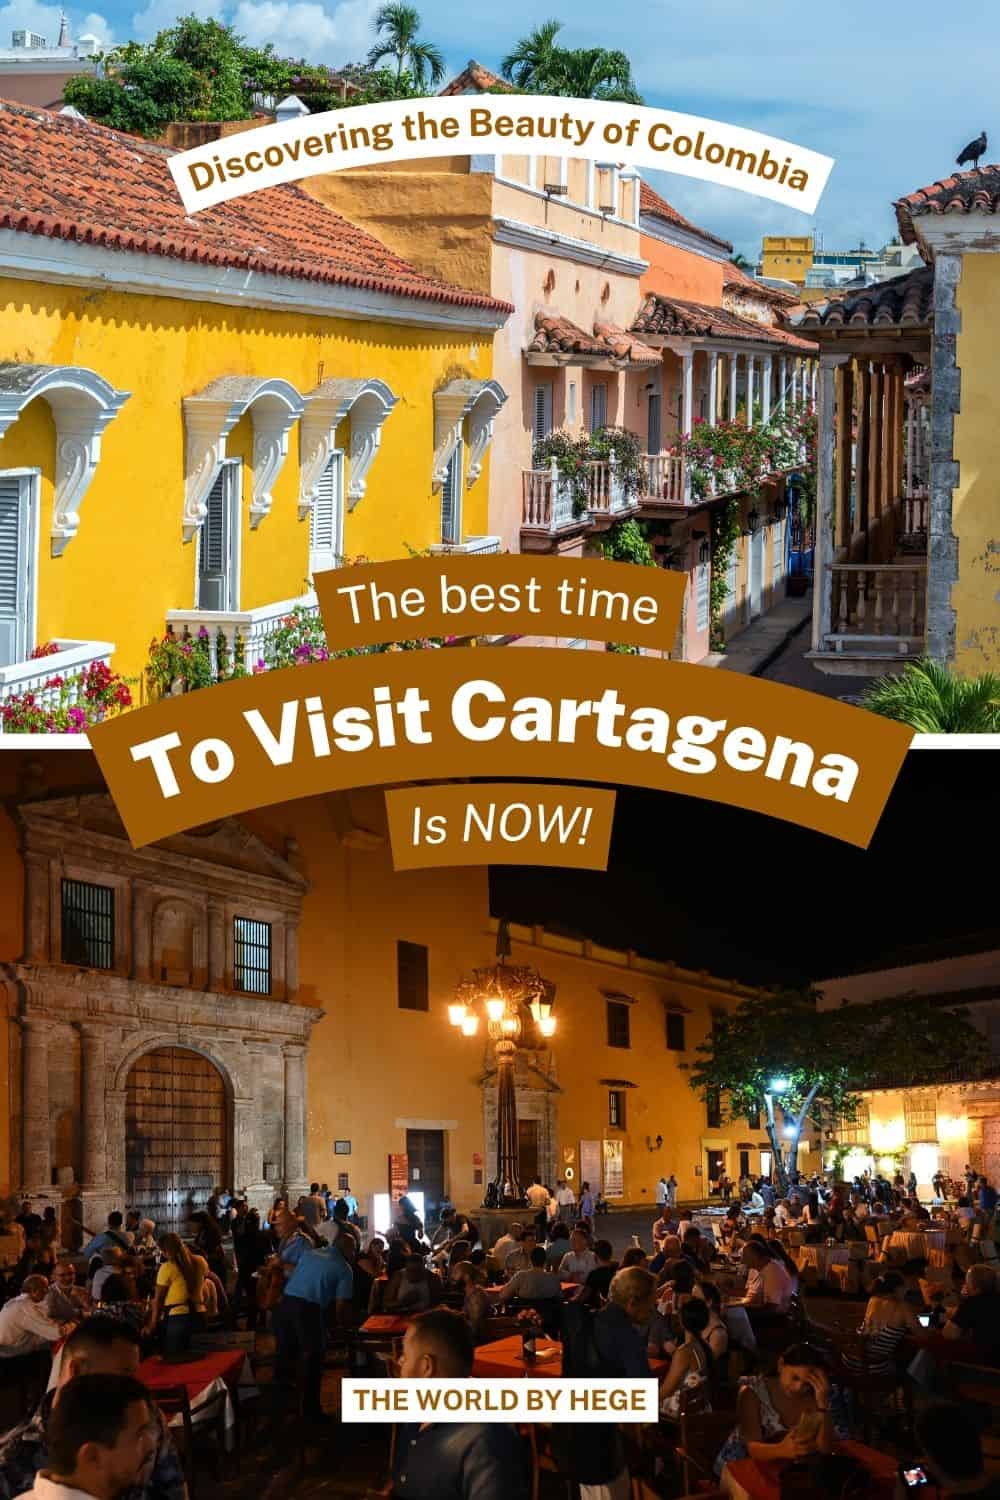 Photo collage from Cartagena colombia. One is from the old city with elegant colonial buildings, and the other from the city main square full of people enjoying the evening seated at outdoors restaurants. 